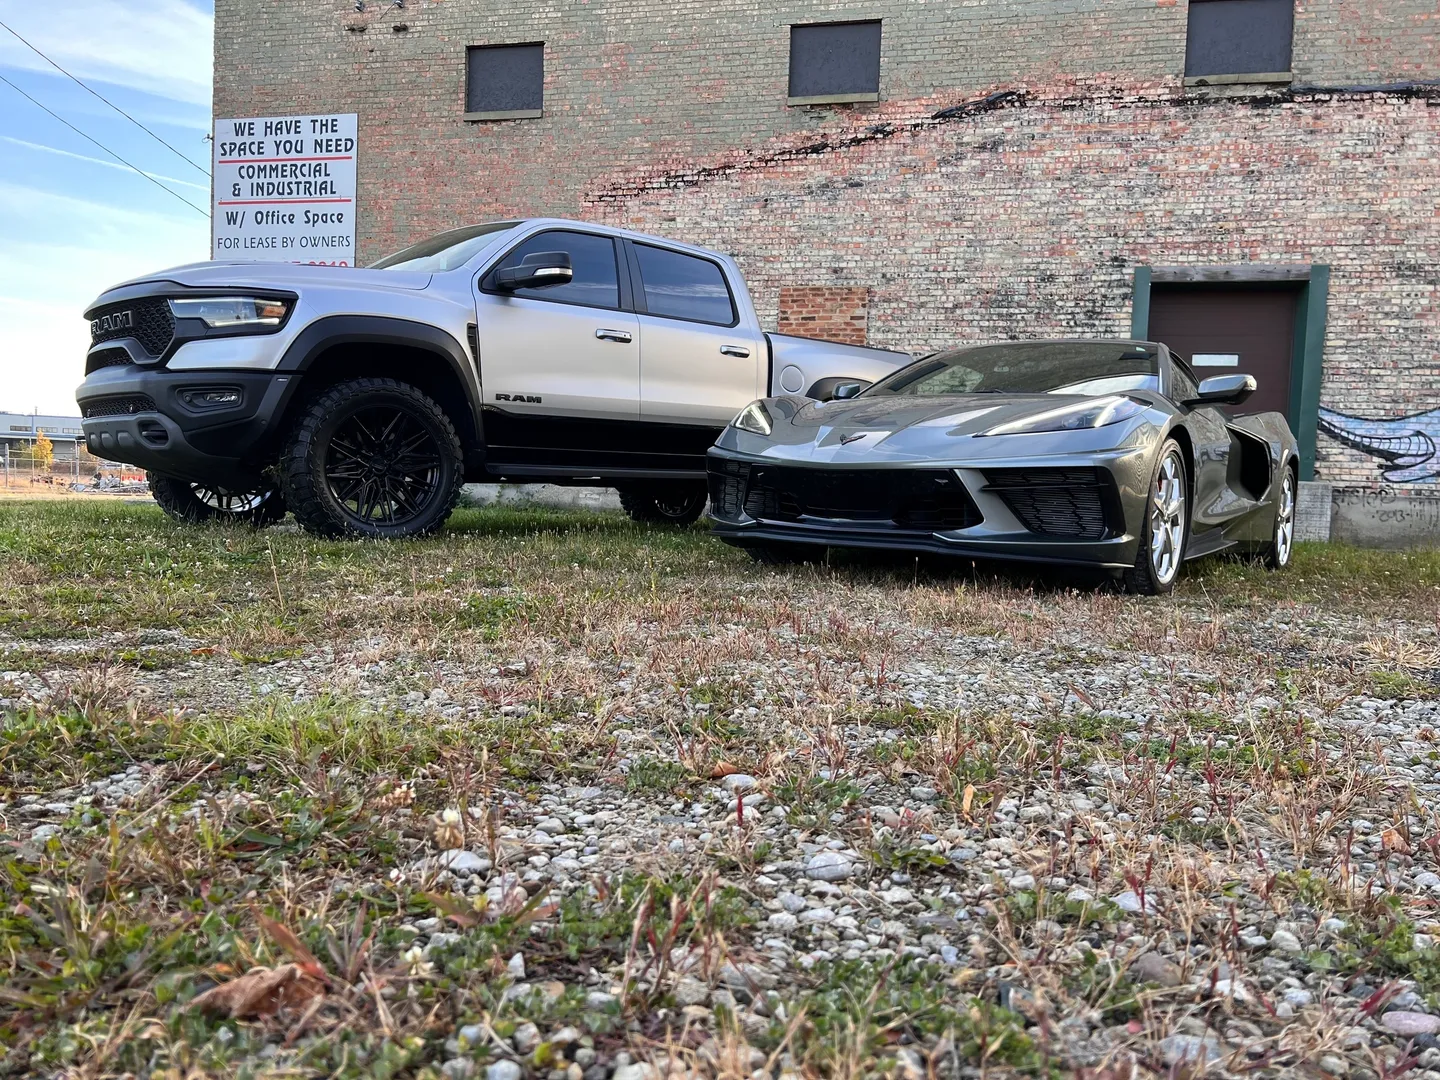 A silver truck parked next to a black sports car.